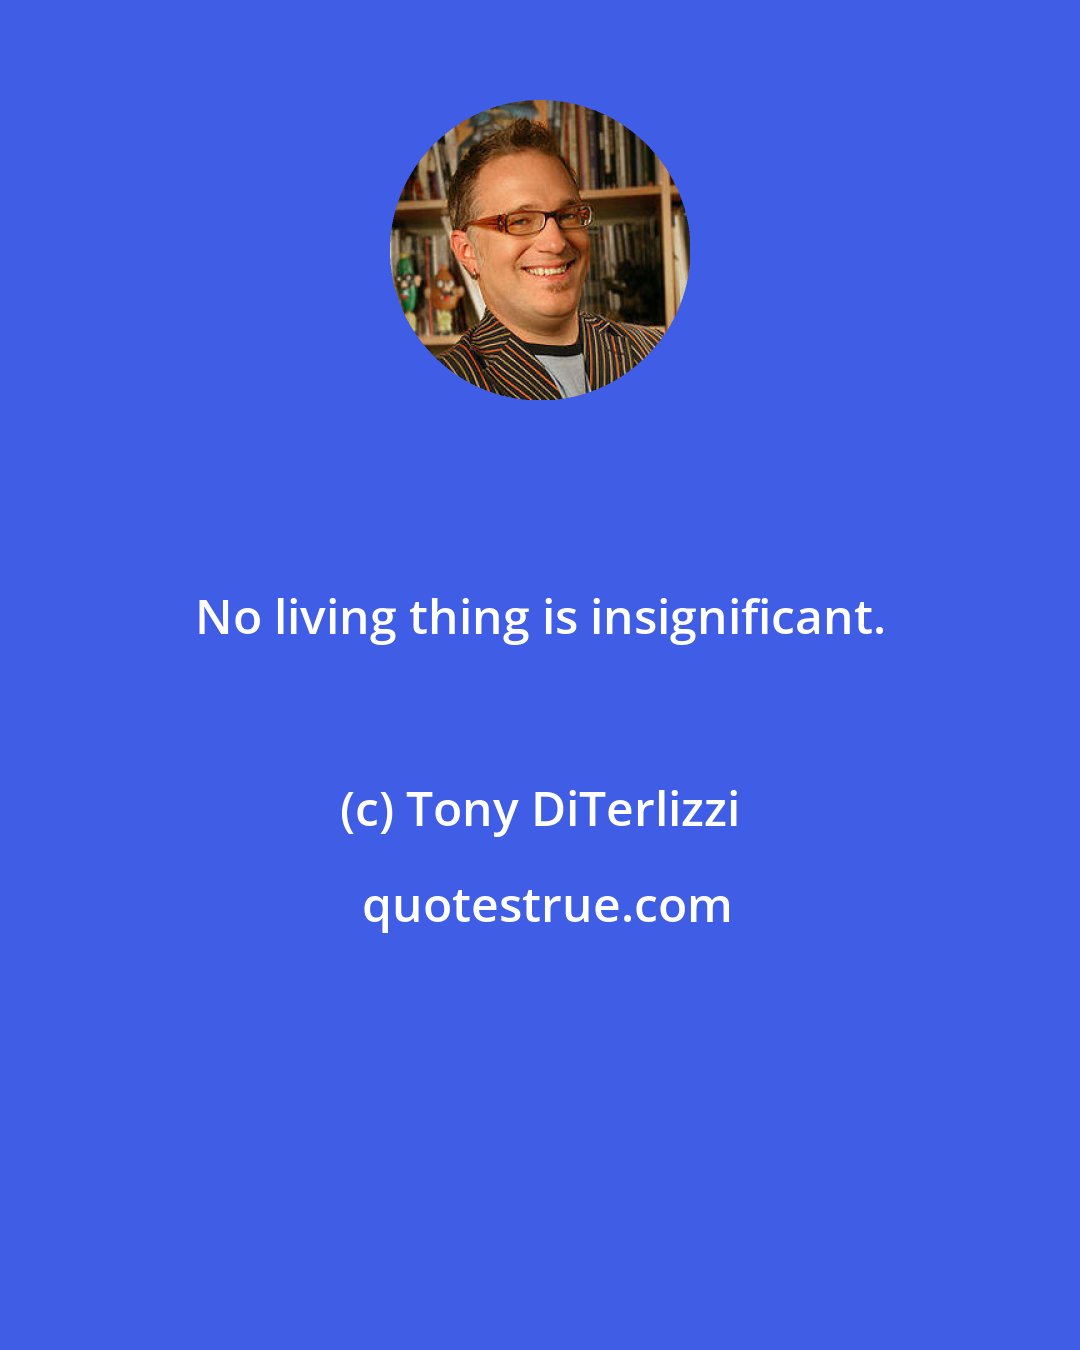 Tony DiTerlizzi: No living thing is insignificant.